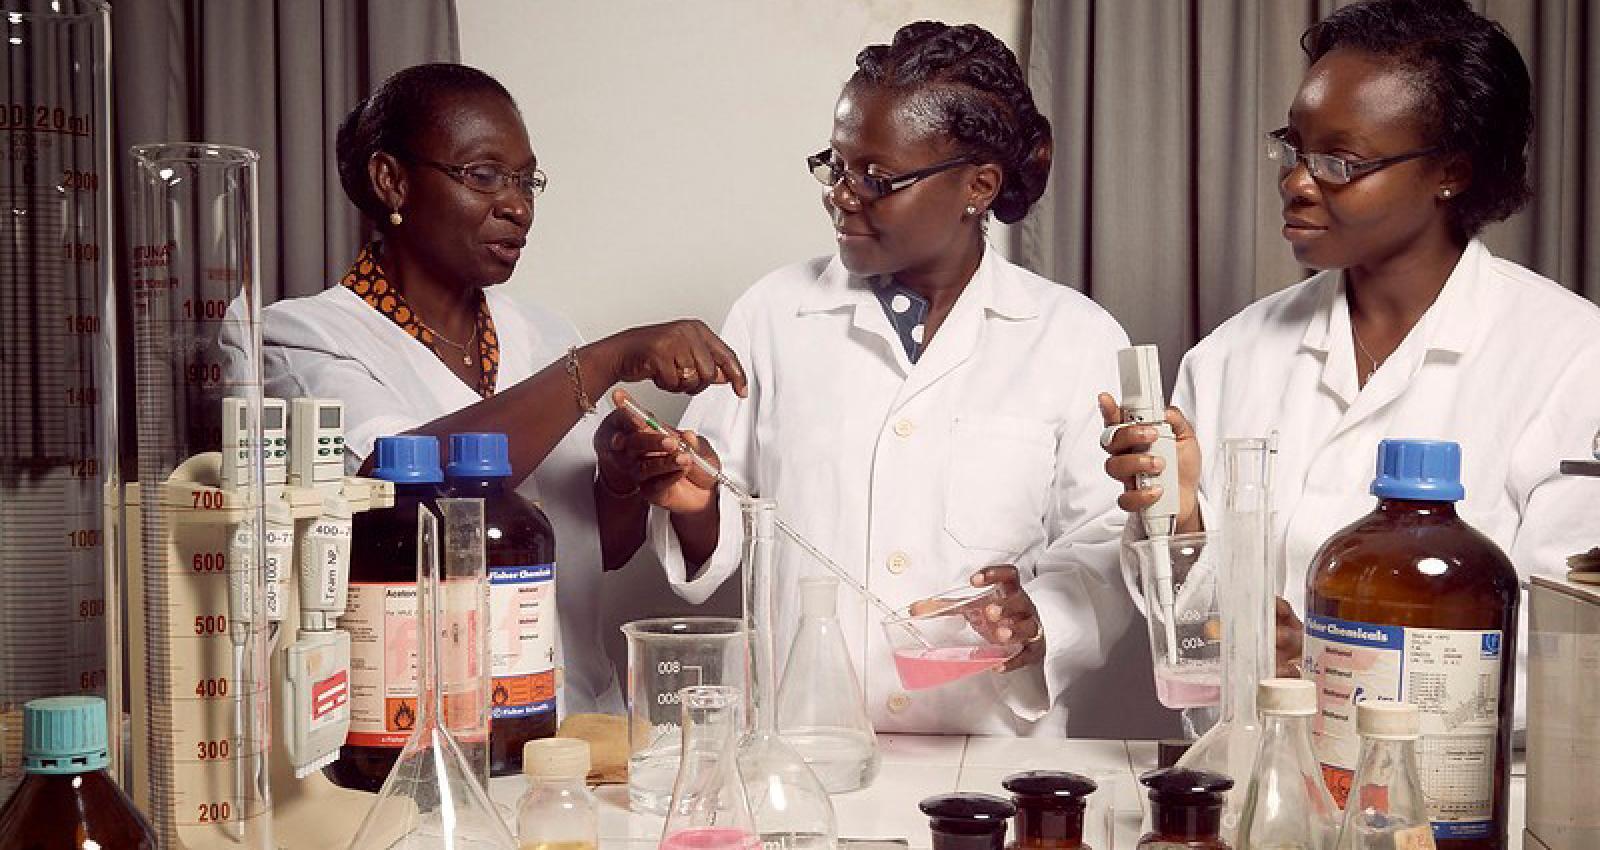 Photo: © Stephan Gladieu / World Bank. Prof. Amivi Kafui Tete-Benissan (left) teaches cell biology and biochemistry at the University of Lomé. She’s also a vocal activist who encourages girls to pursue science as a career path. “Female students represent only 10 percent of our student body in science and engineering,” she says sadly.